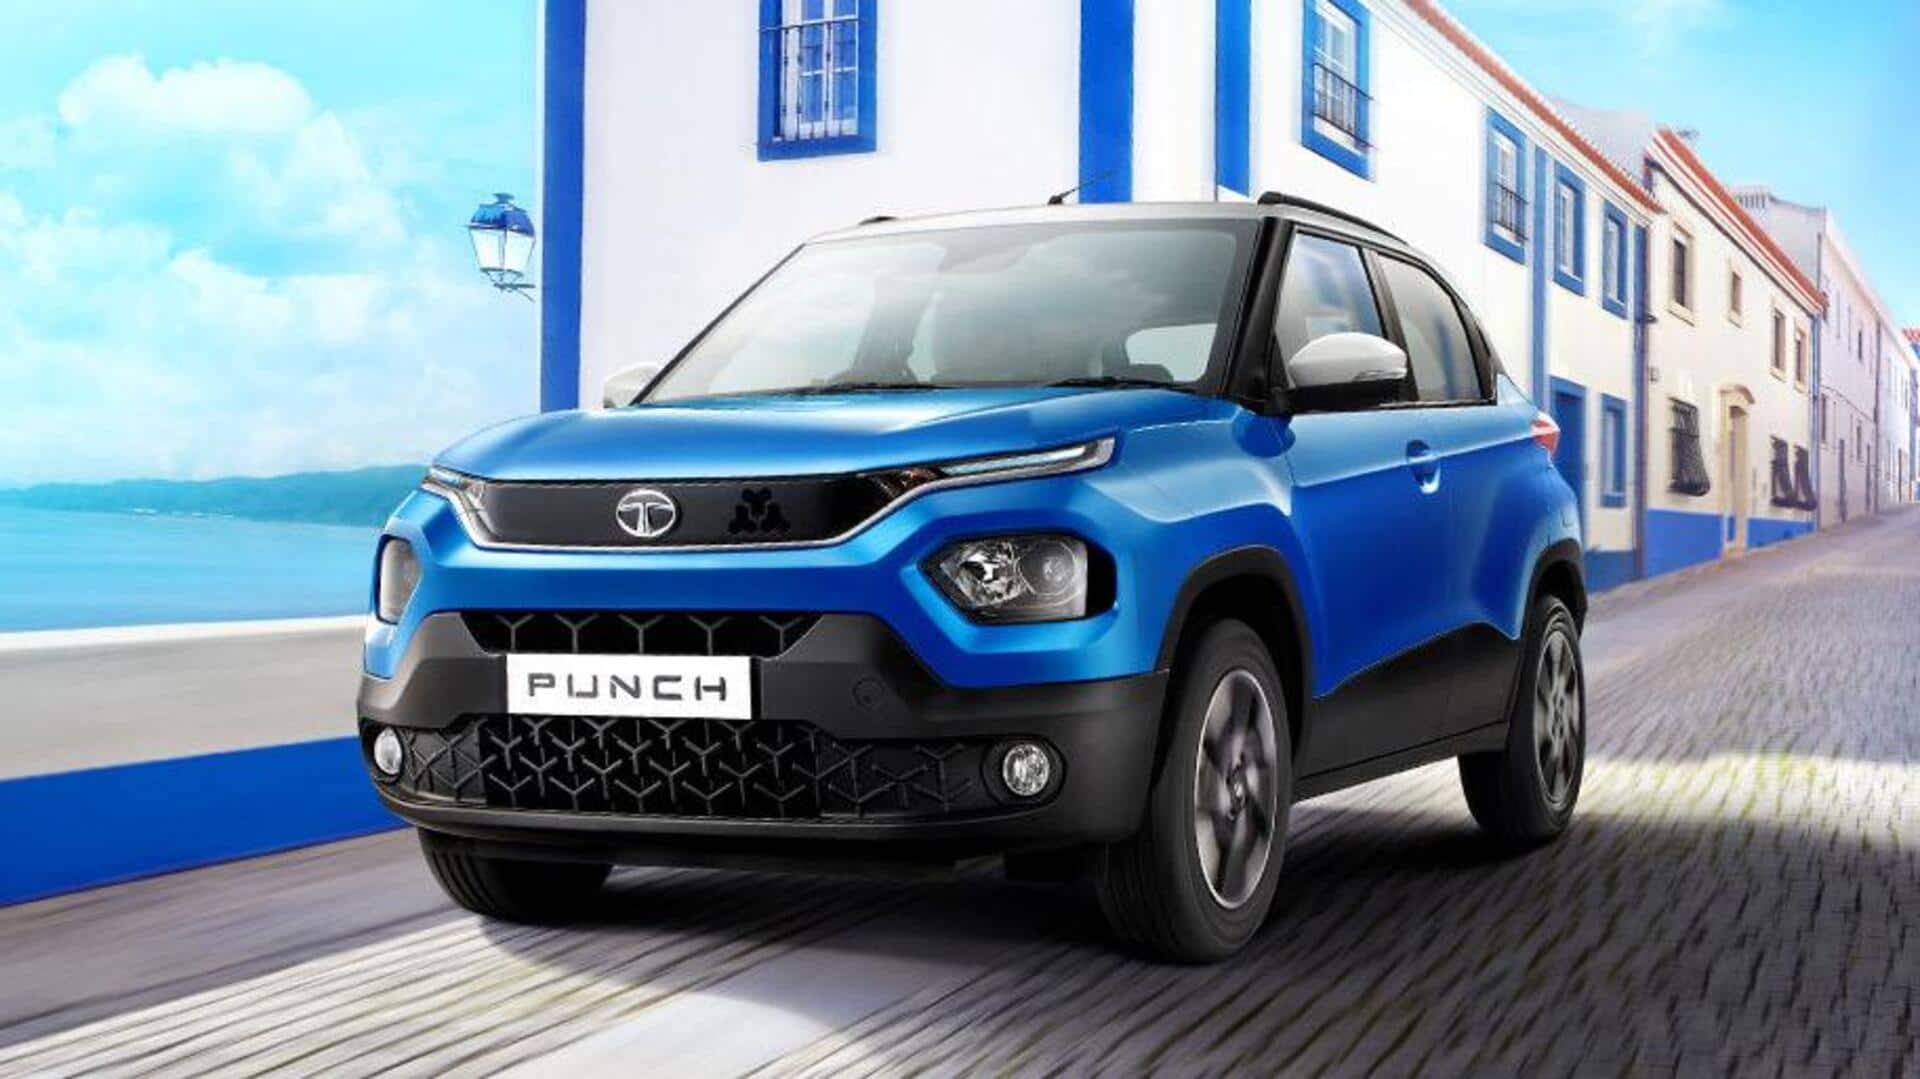 Tata Punch EV to debut soon: What to expect